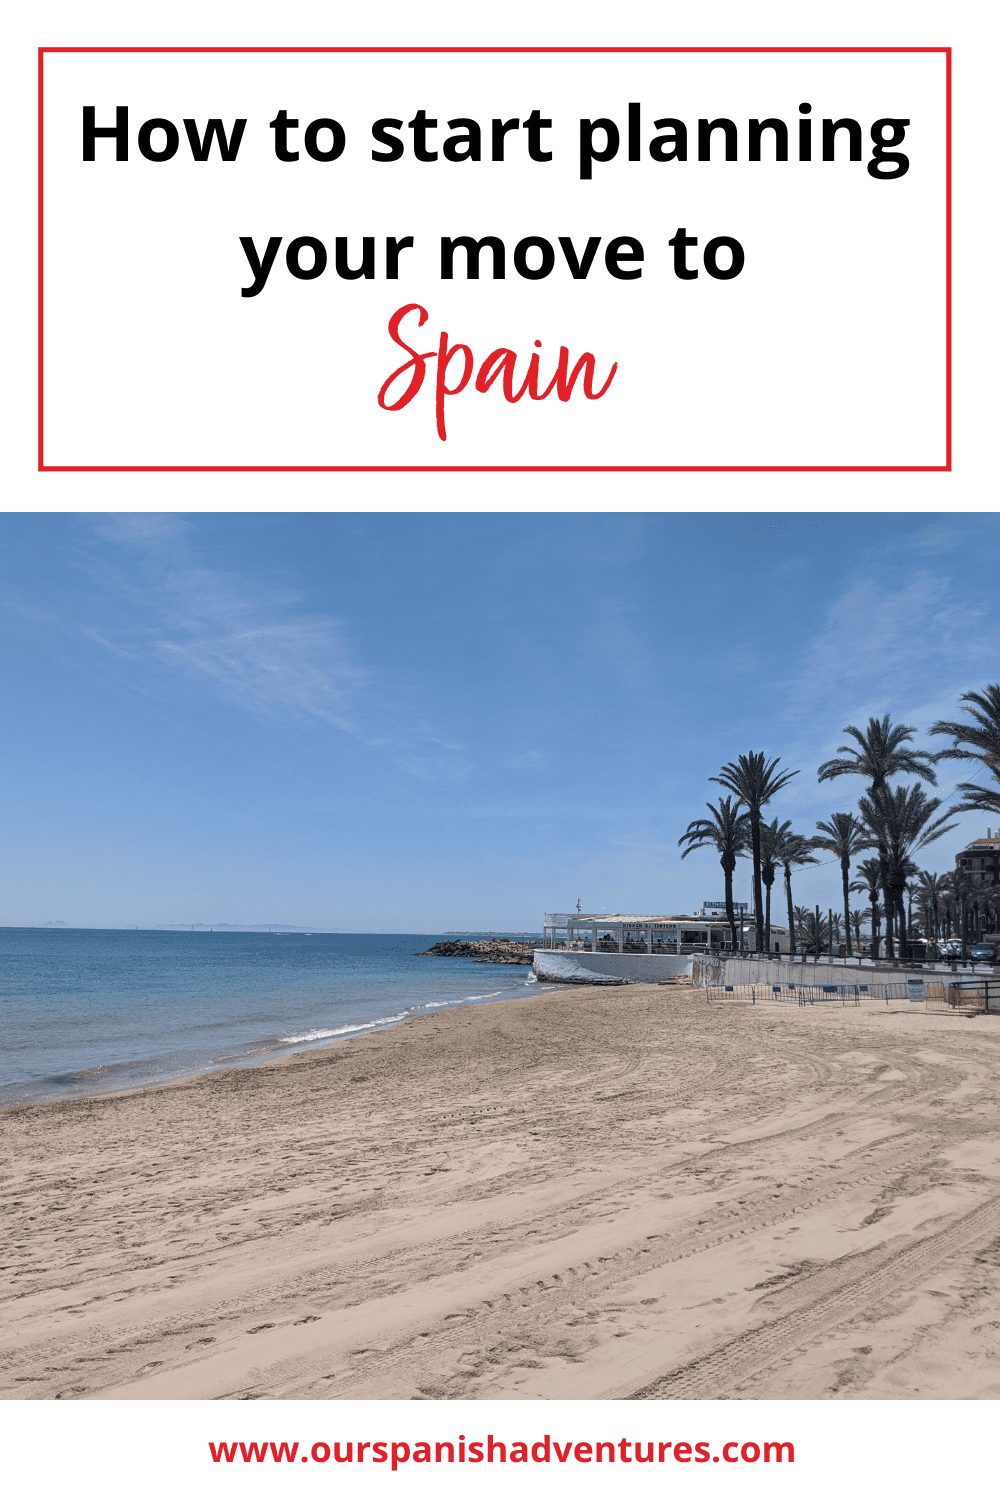 How to start planning your move to Spain | Our Spanish Adventures